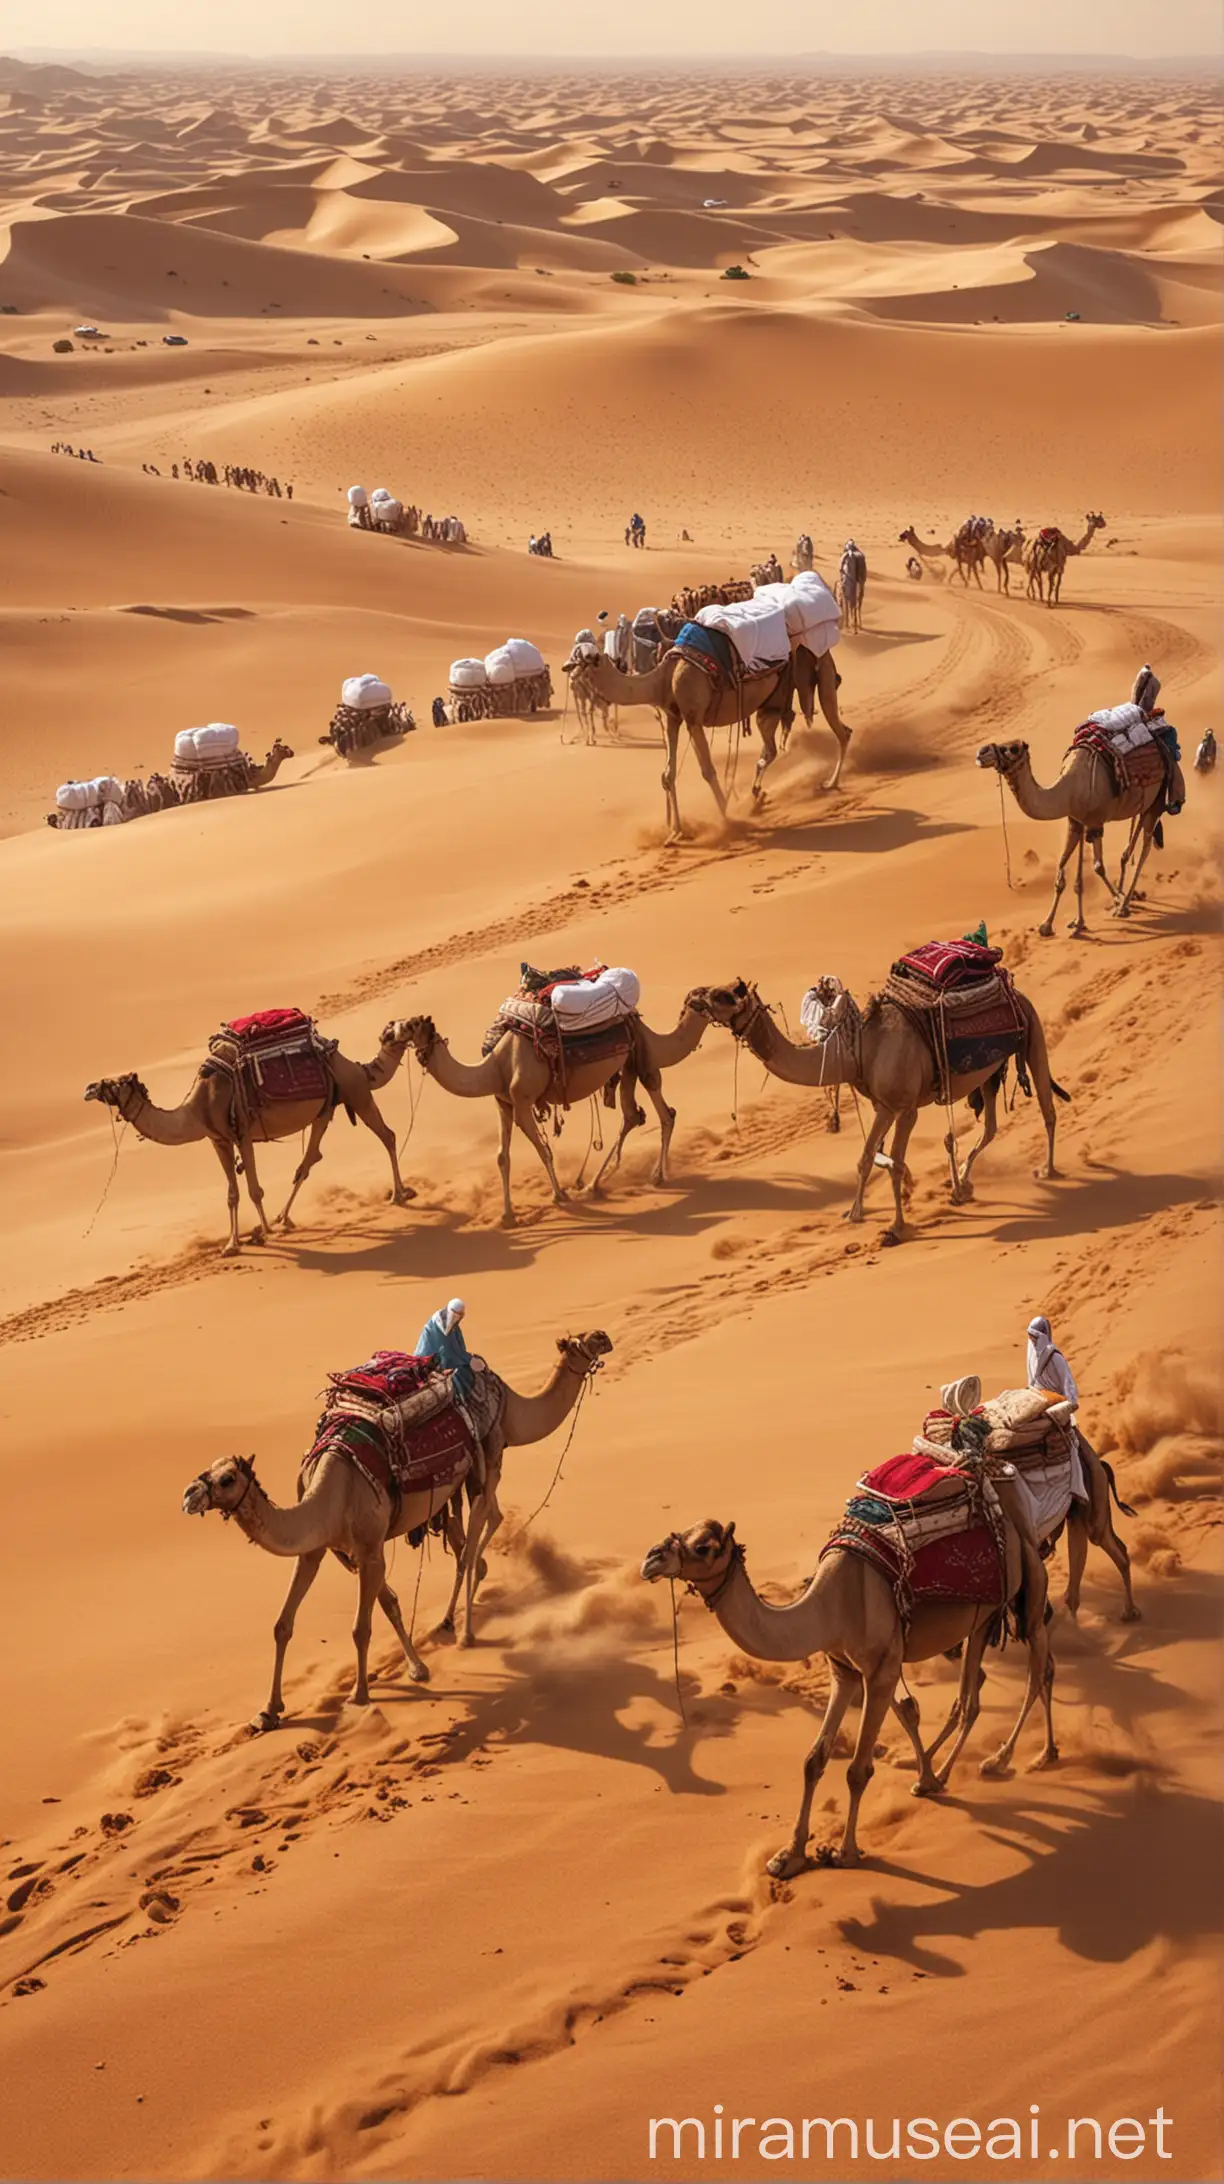 Trade Caravans Crossing Deserts: Picture a caravan of camels laden with goods traversing the vast Arabian desert, symbolizing the trade routes that connected cities like Mecca and Medina to distant lands. The image evokes the challenges and adventures of ancient traders as they journeyed along the Incense and Spice Routes., with islamic tradition , HD and 4K 